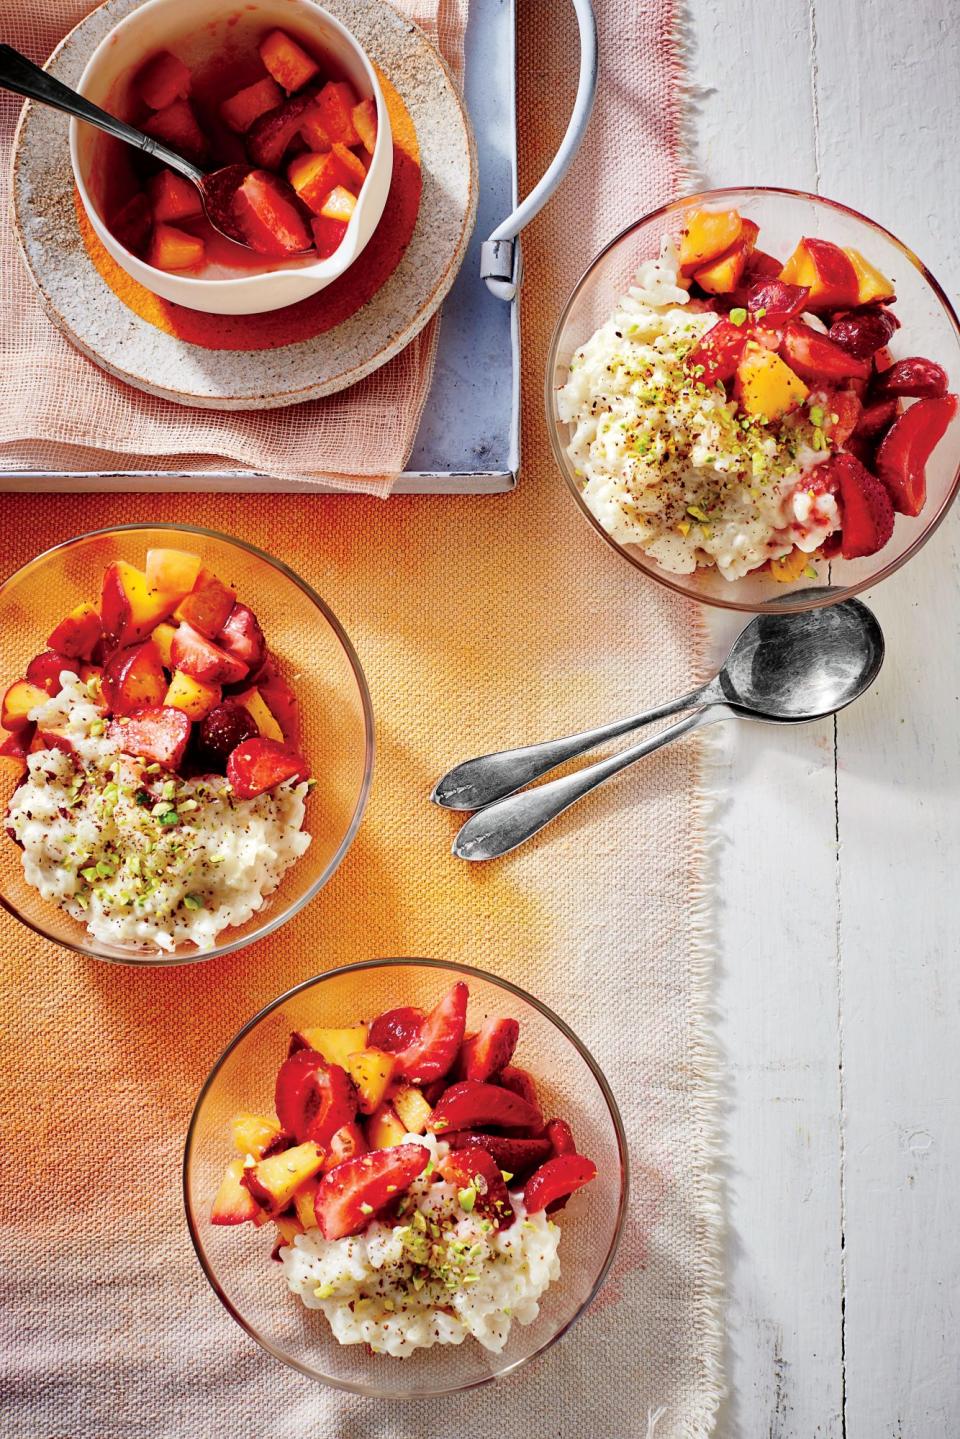 Coconut Rice Pudding with Strawberry-Nectarine Compote